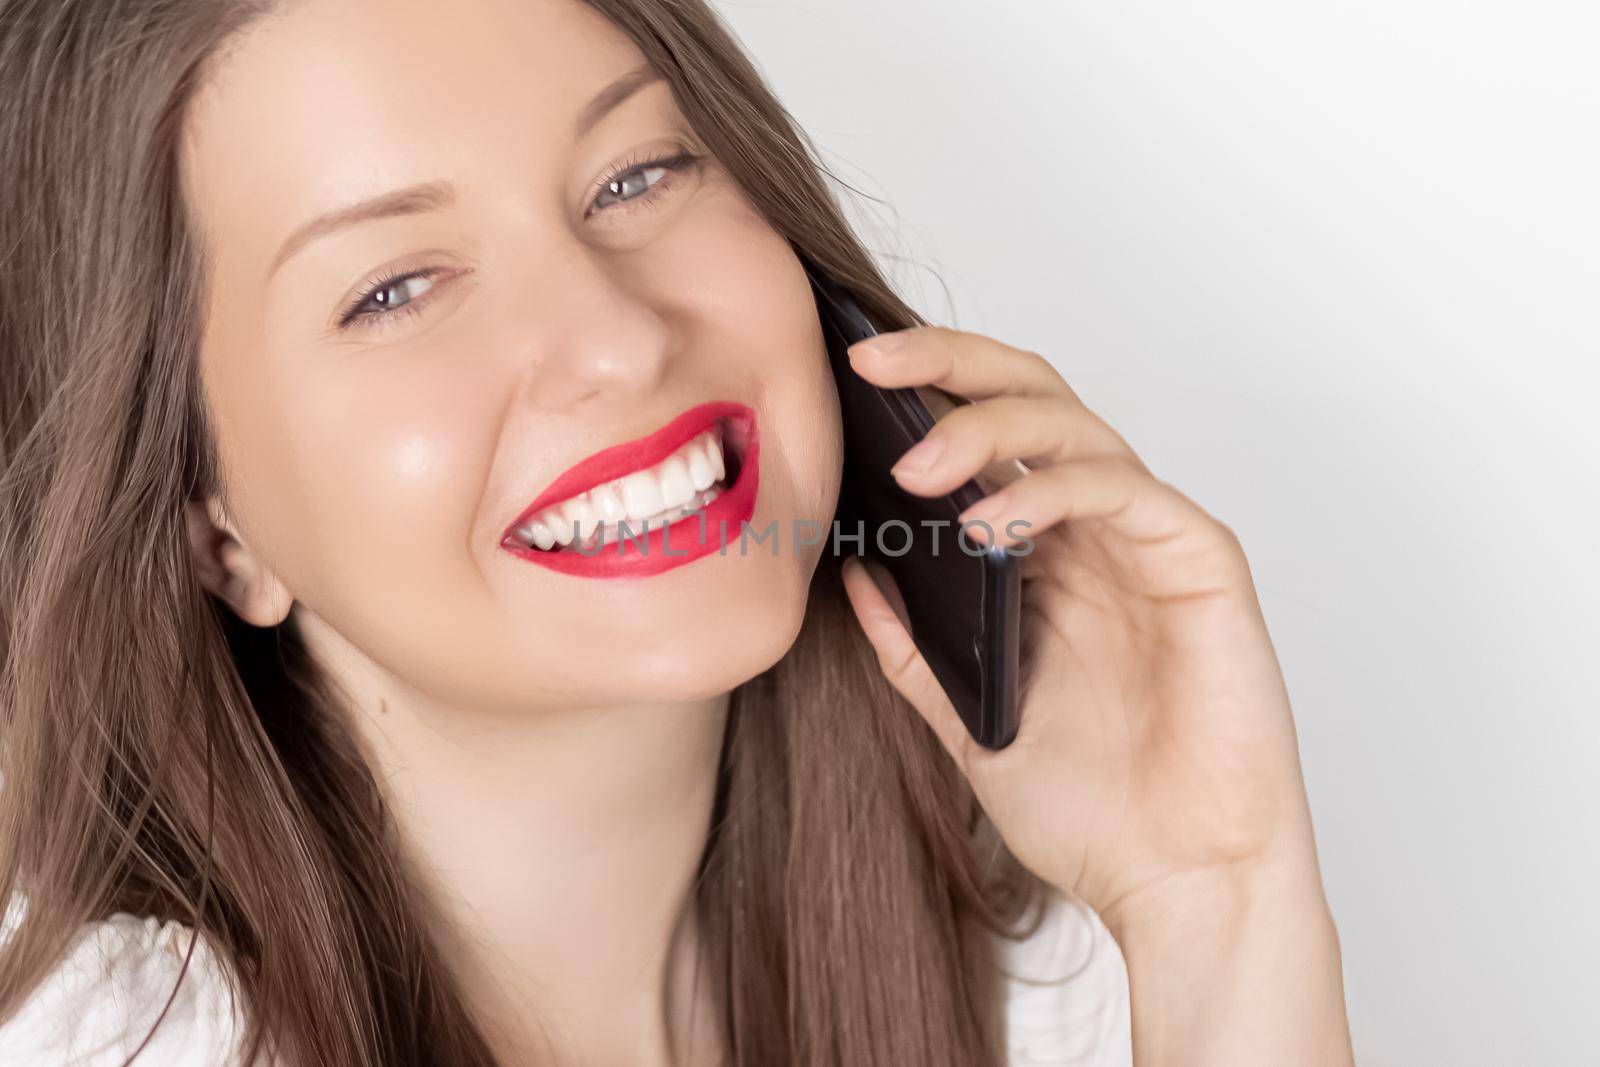 Happy smiling woman calling on smartphone, portrait on white background. People, technology and communication concept by Anneleven